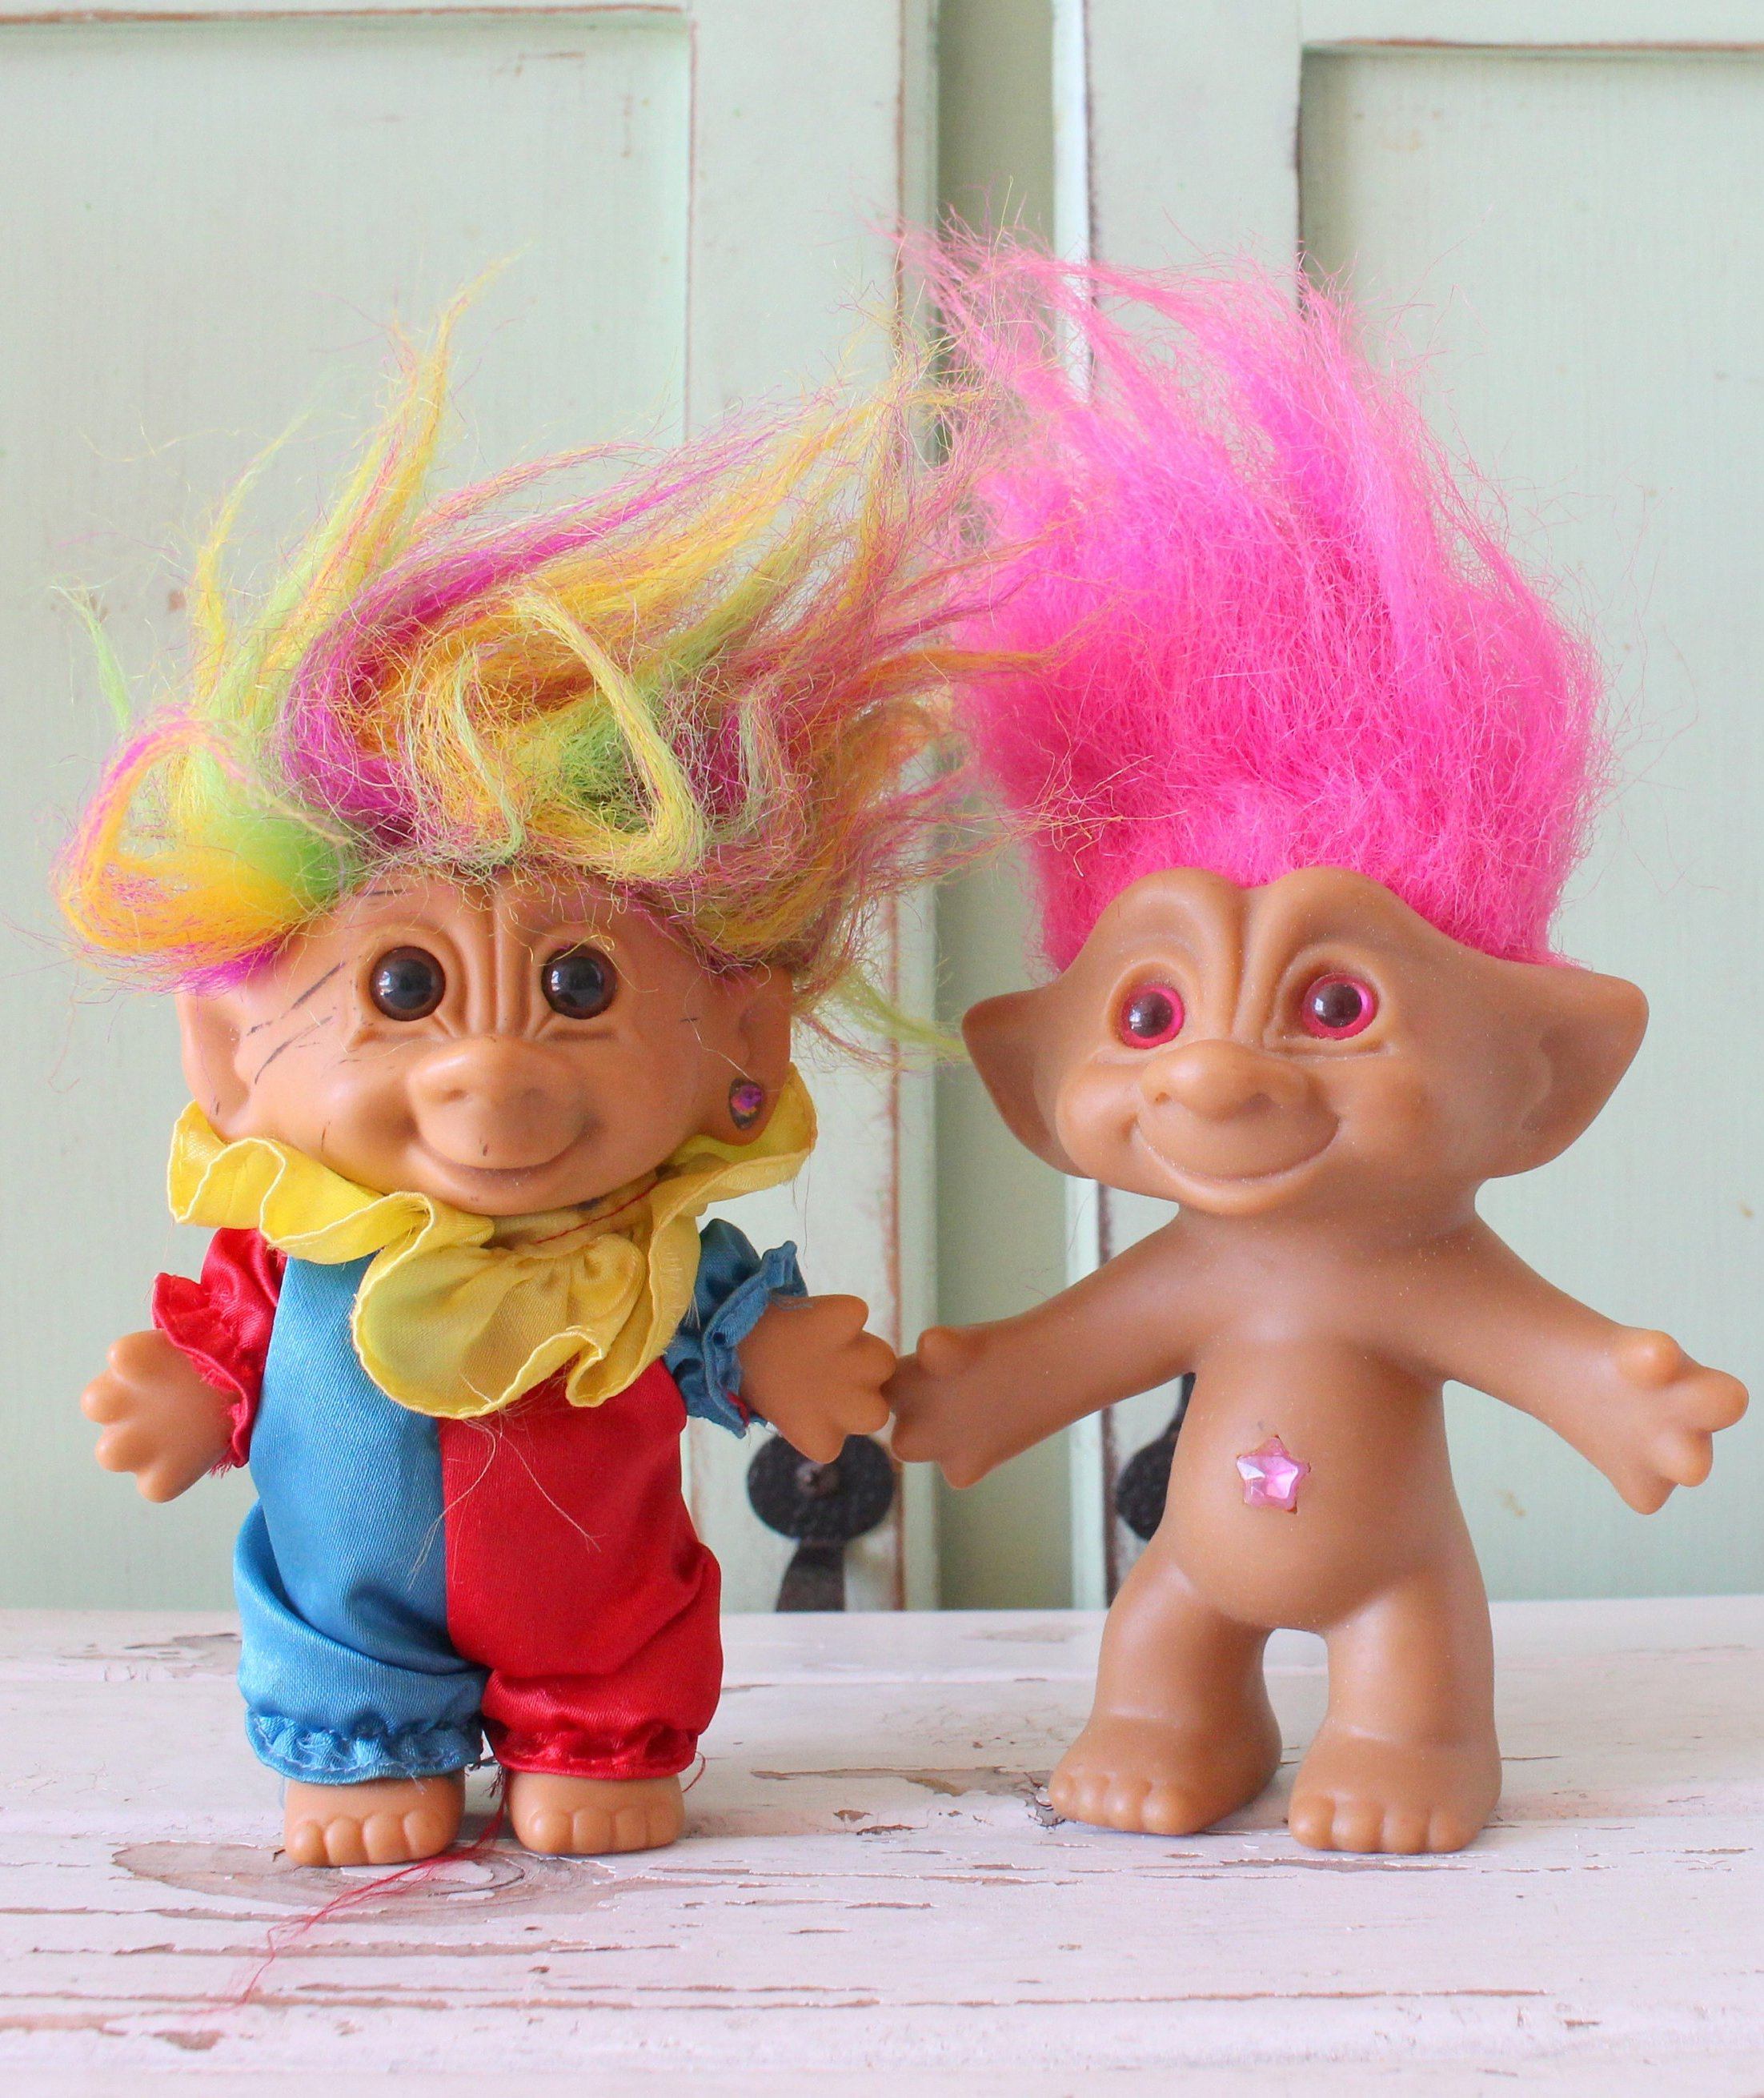 Collectible Trolls figures from the 1980s